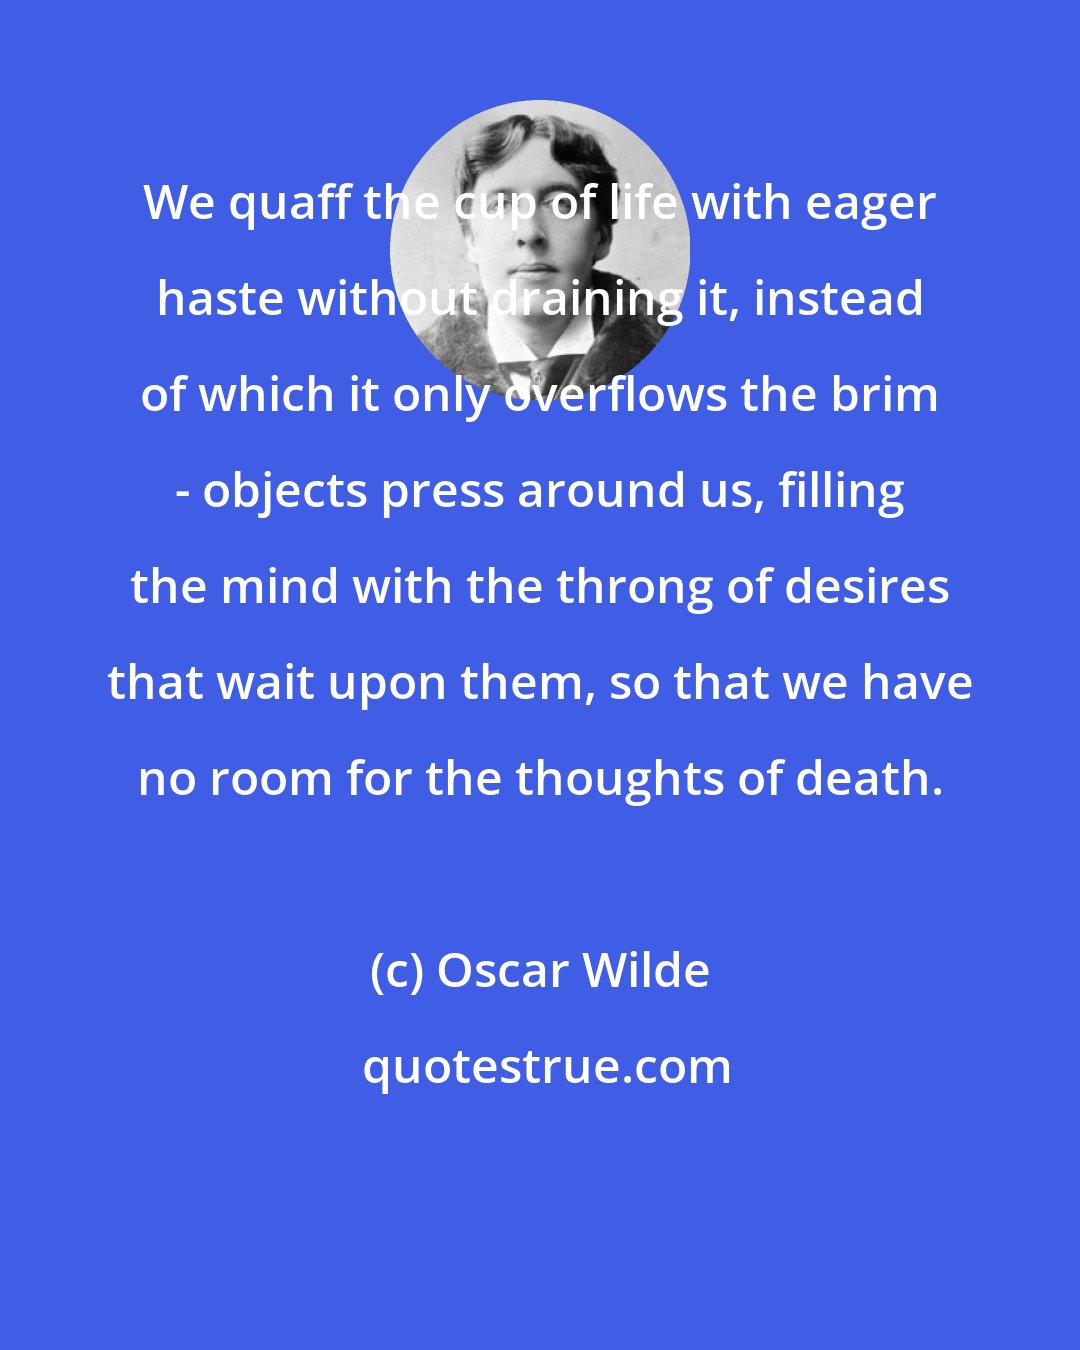 Oscar Wilde: We quaff the cup of life with eager haste without draining it, instead of which it only overflows the brim - objects press around us, filling the mind with the throng of desires that wait upon them, so that we have no room for the thoughts of death.